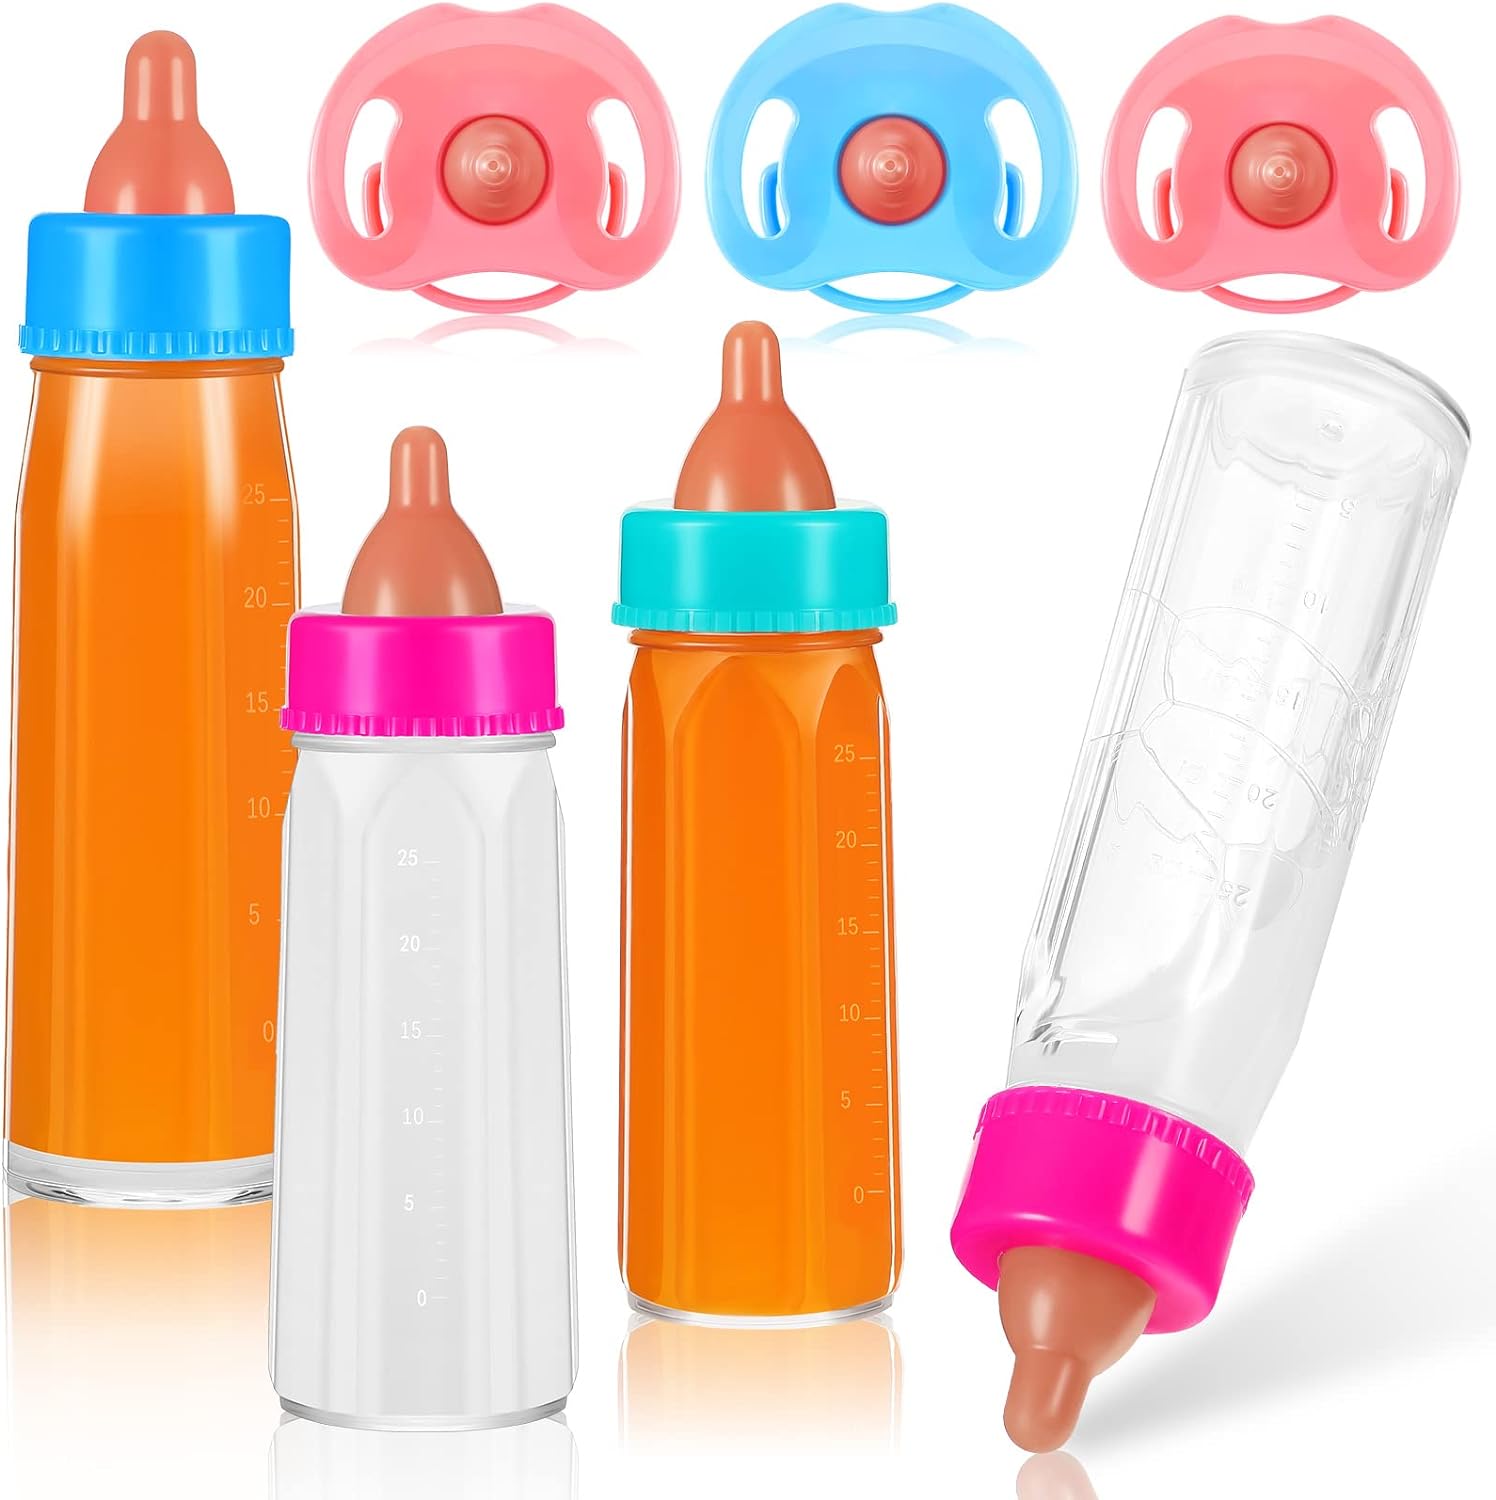 Exquisite Buggy My Sweet Baby Disappearing Magic Bottles – Includes 1 Milk, 1 Juice Bottle with Pacifier for Baby Doll (Colorful)